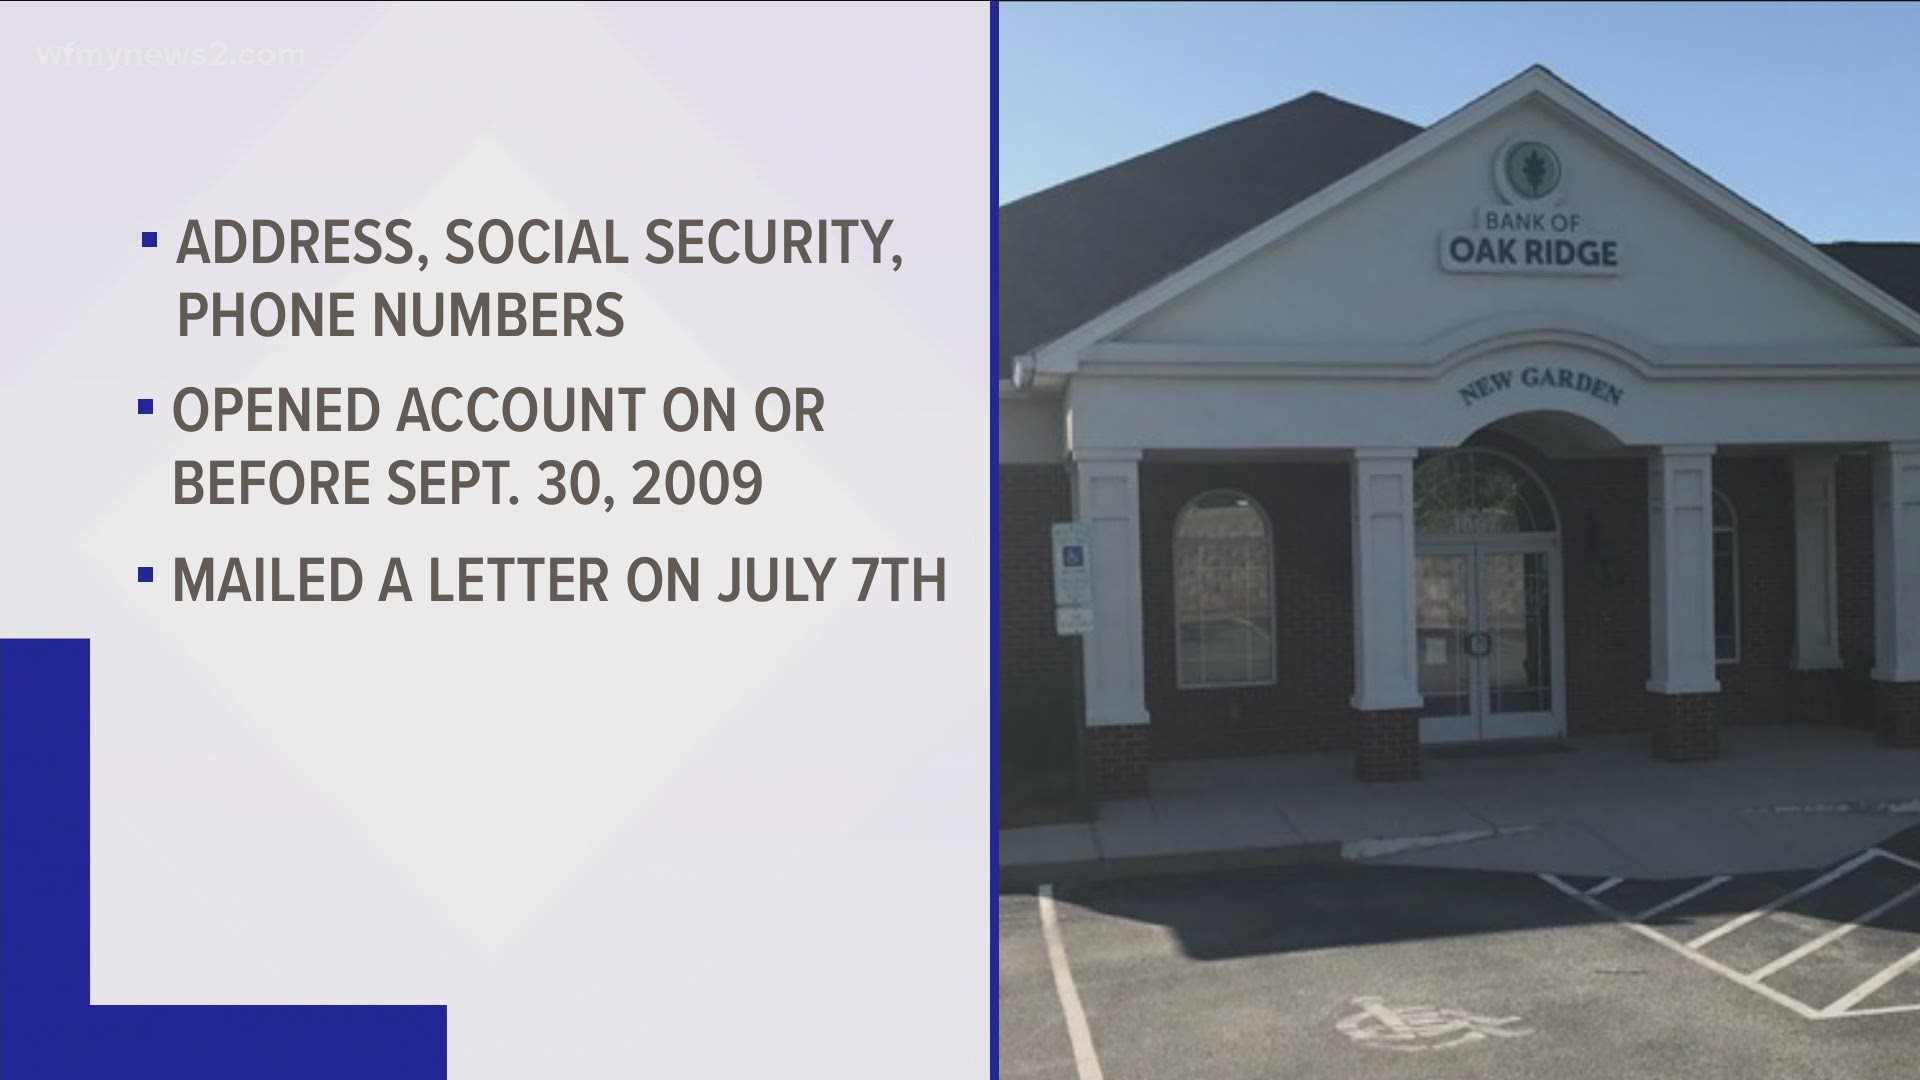 A community bank in the Triad said an "unauthorized actor" accessed banking customer data in late April.